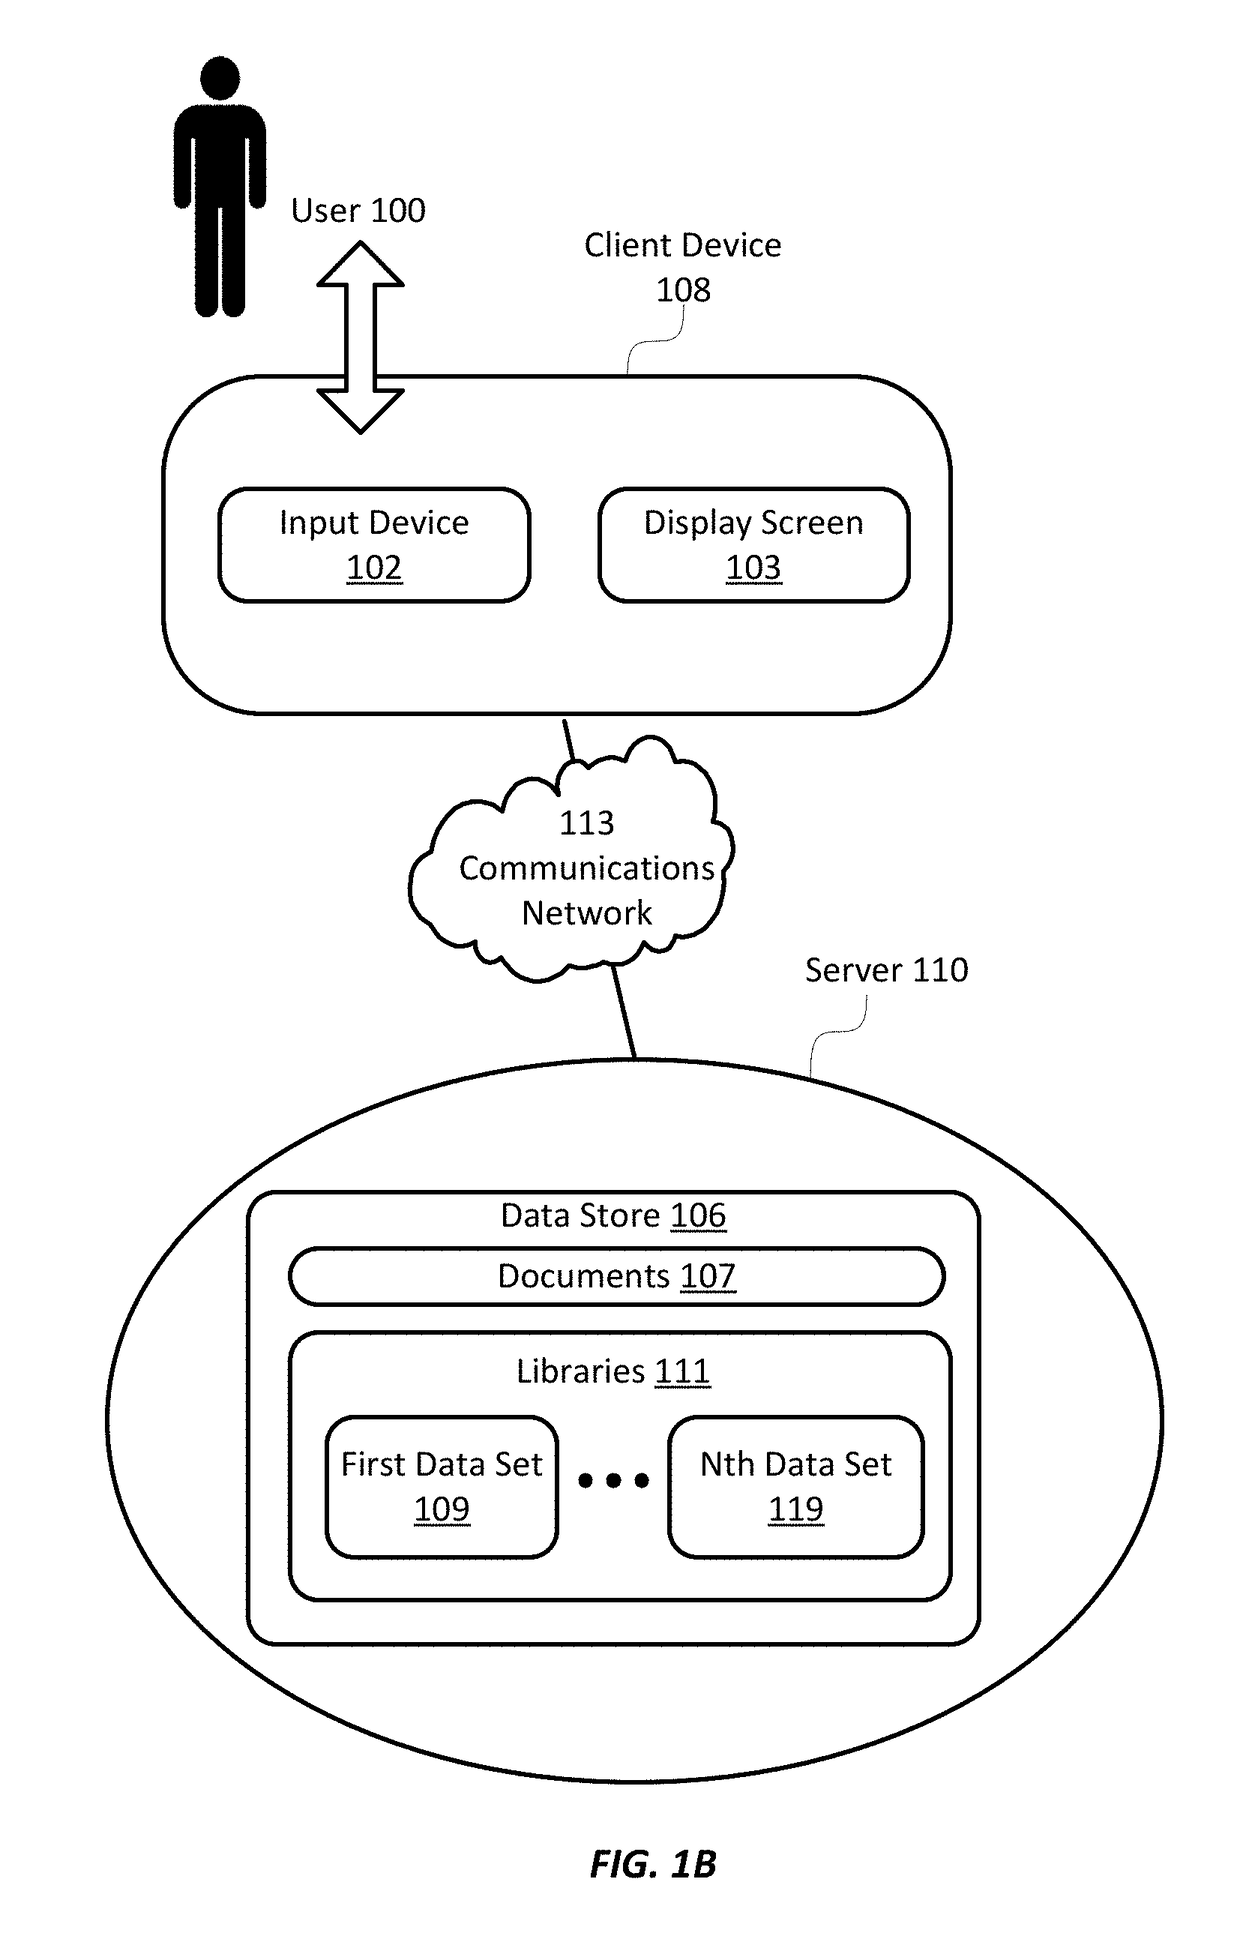 Automated provisioning of relational information for a summary data visualization